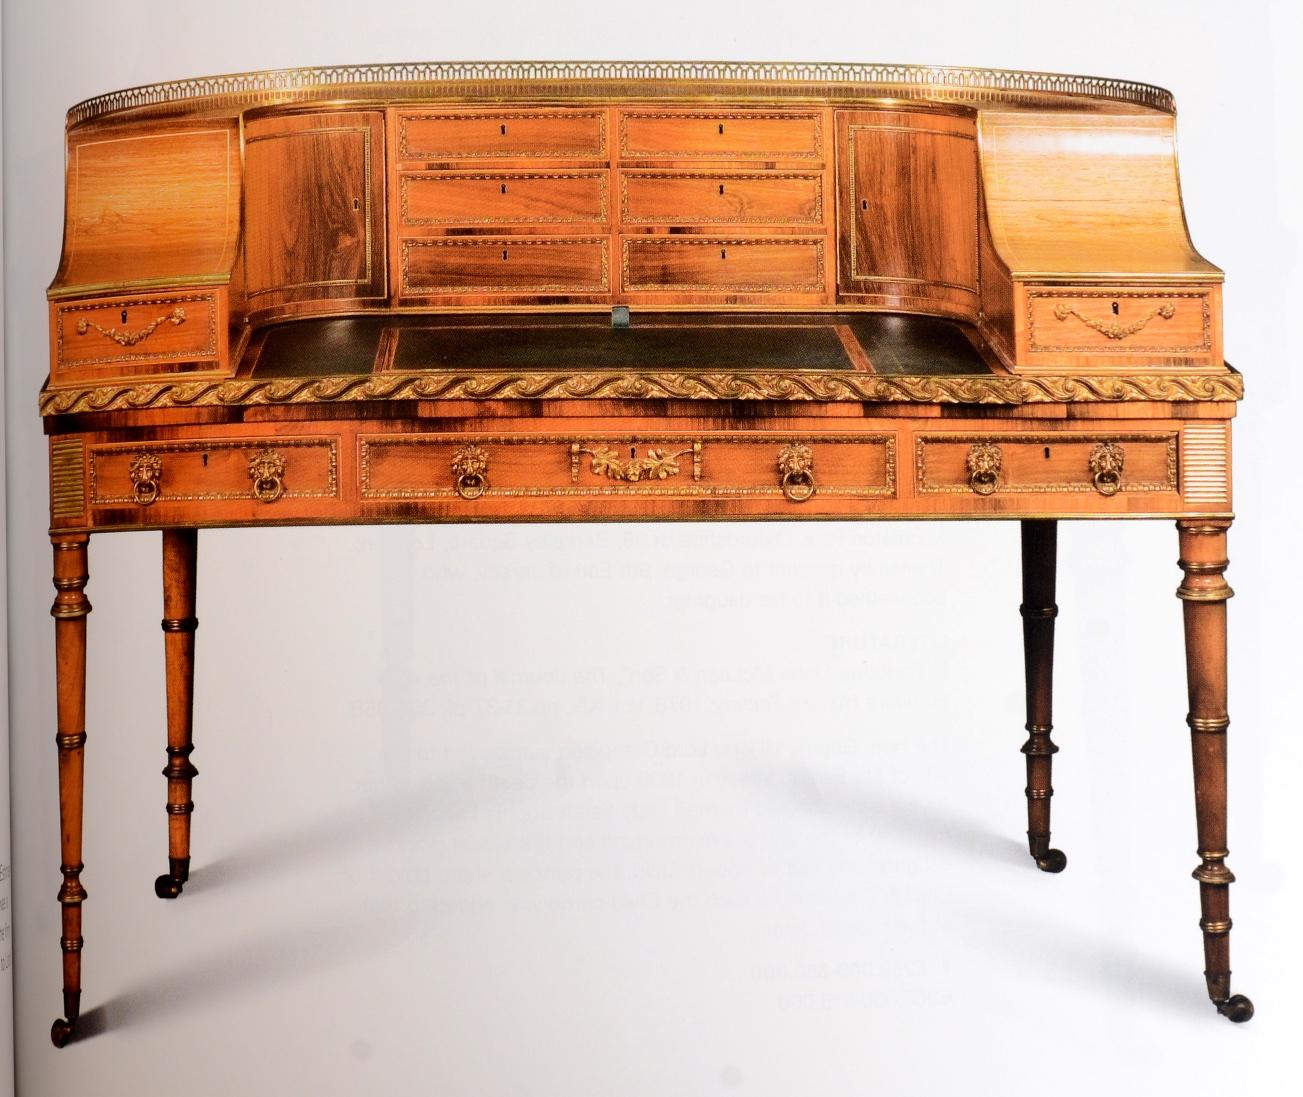 Contemporary Sotheby's: Important English Furniture including the Horlick Collection For Sale